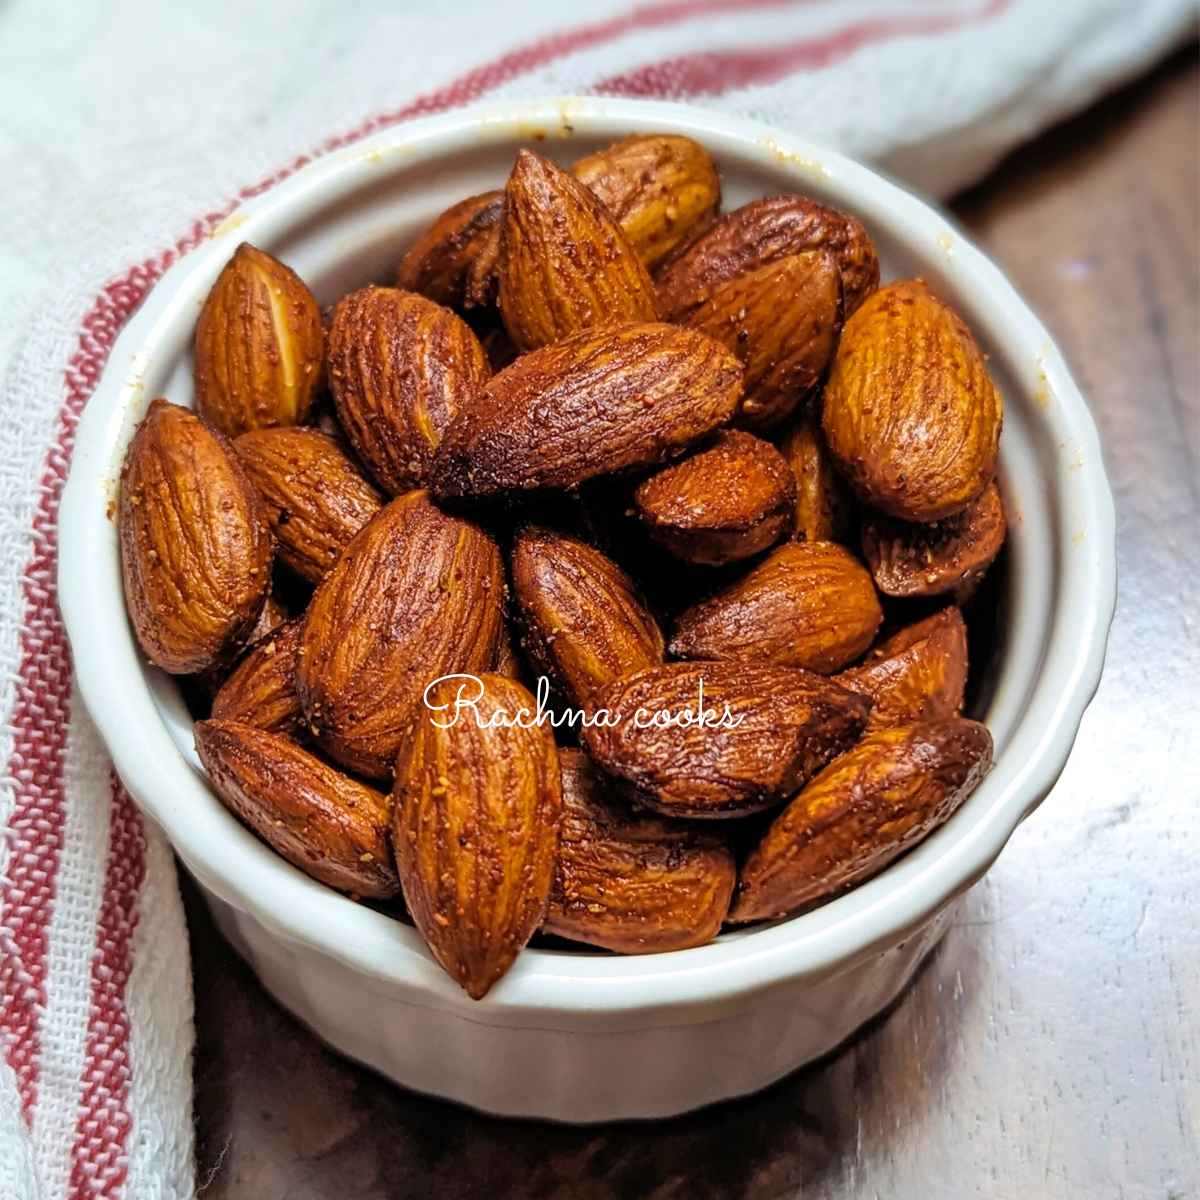 Close up of a bowl of roasted almonds.